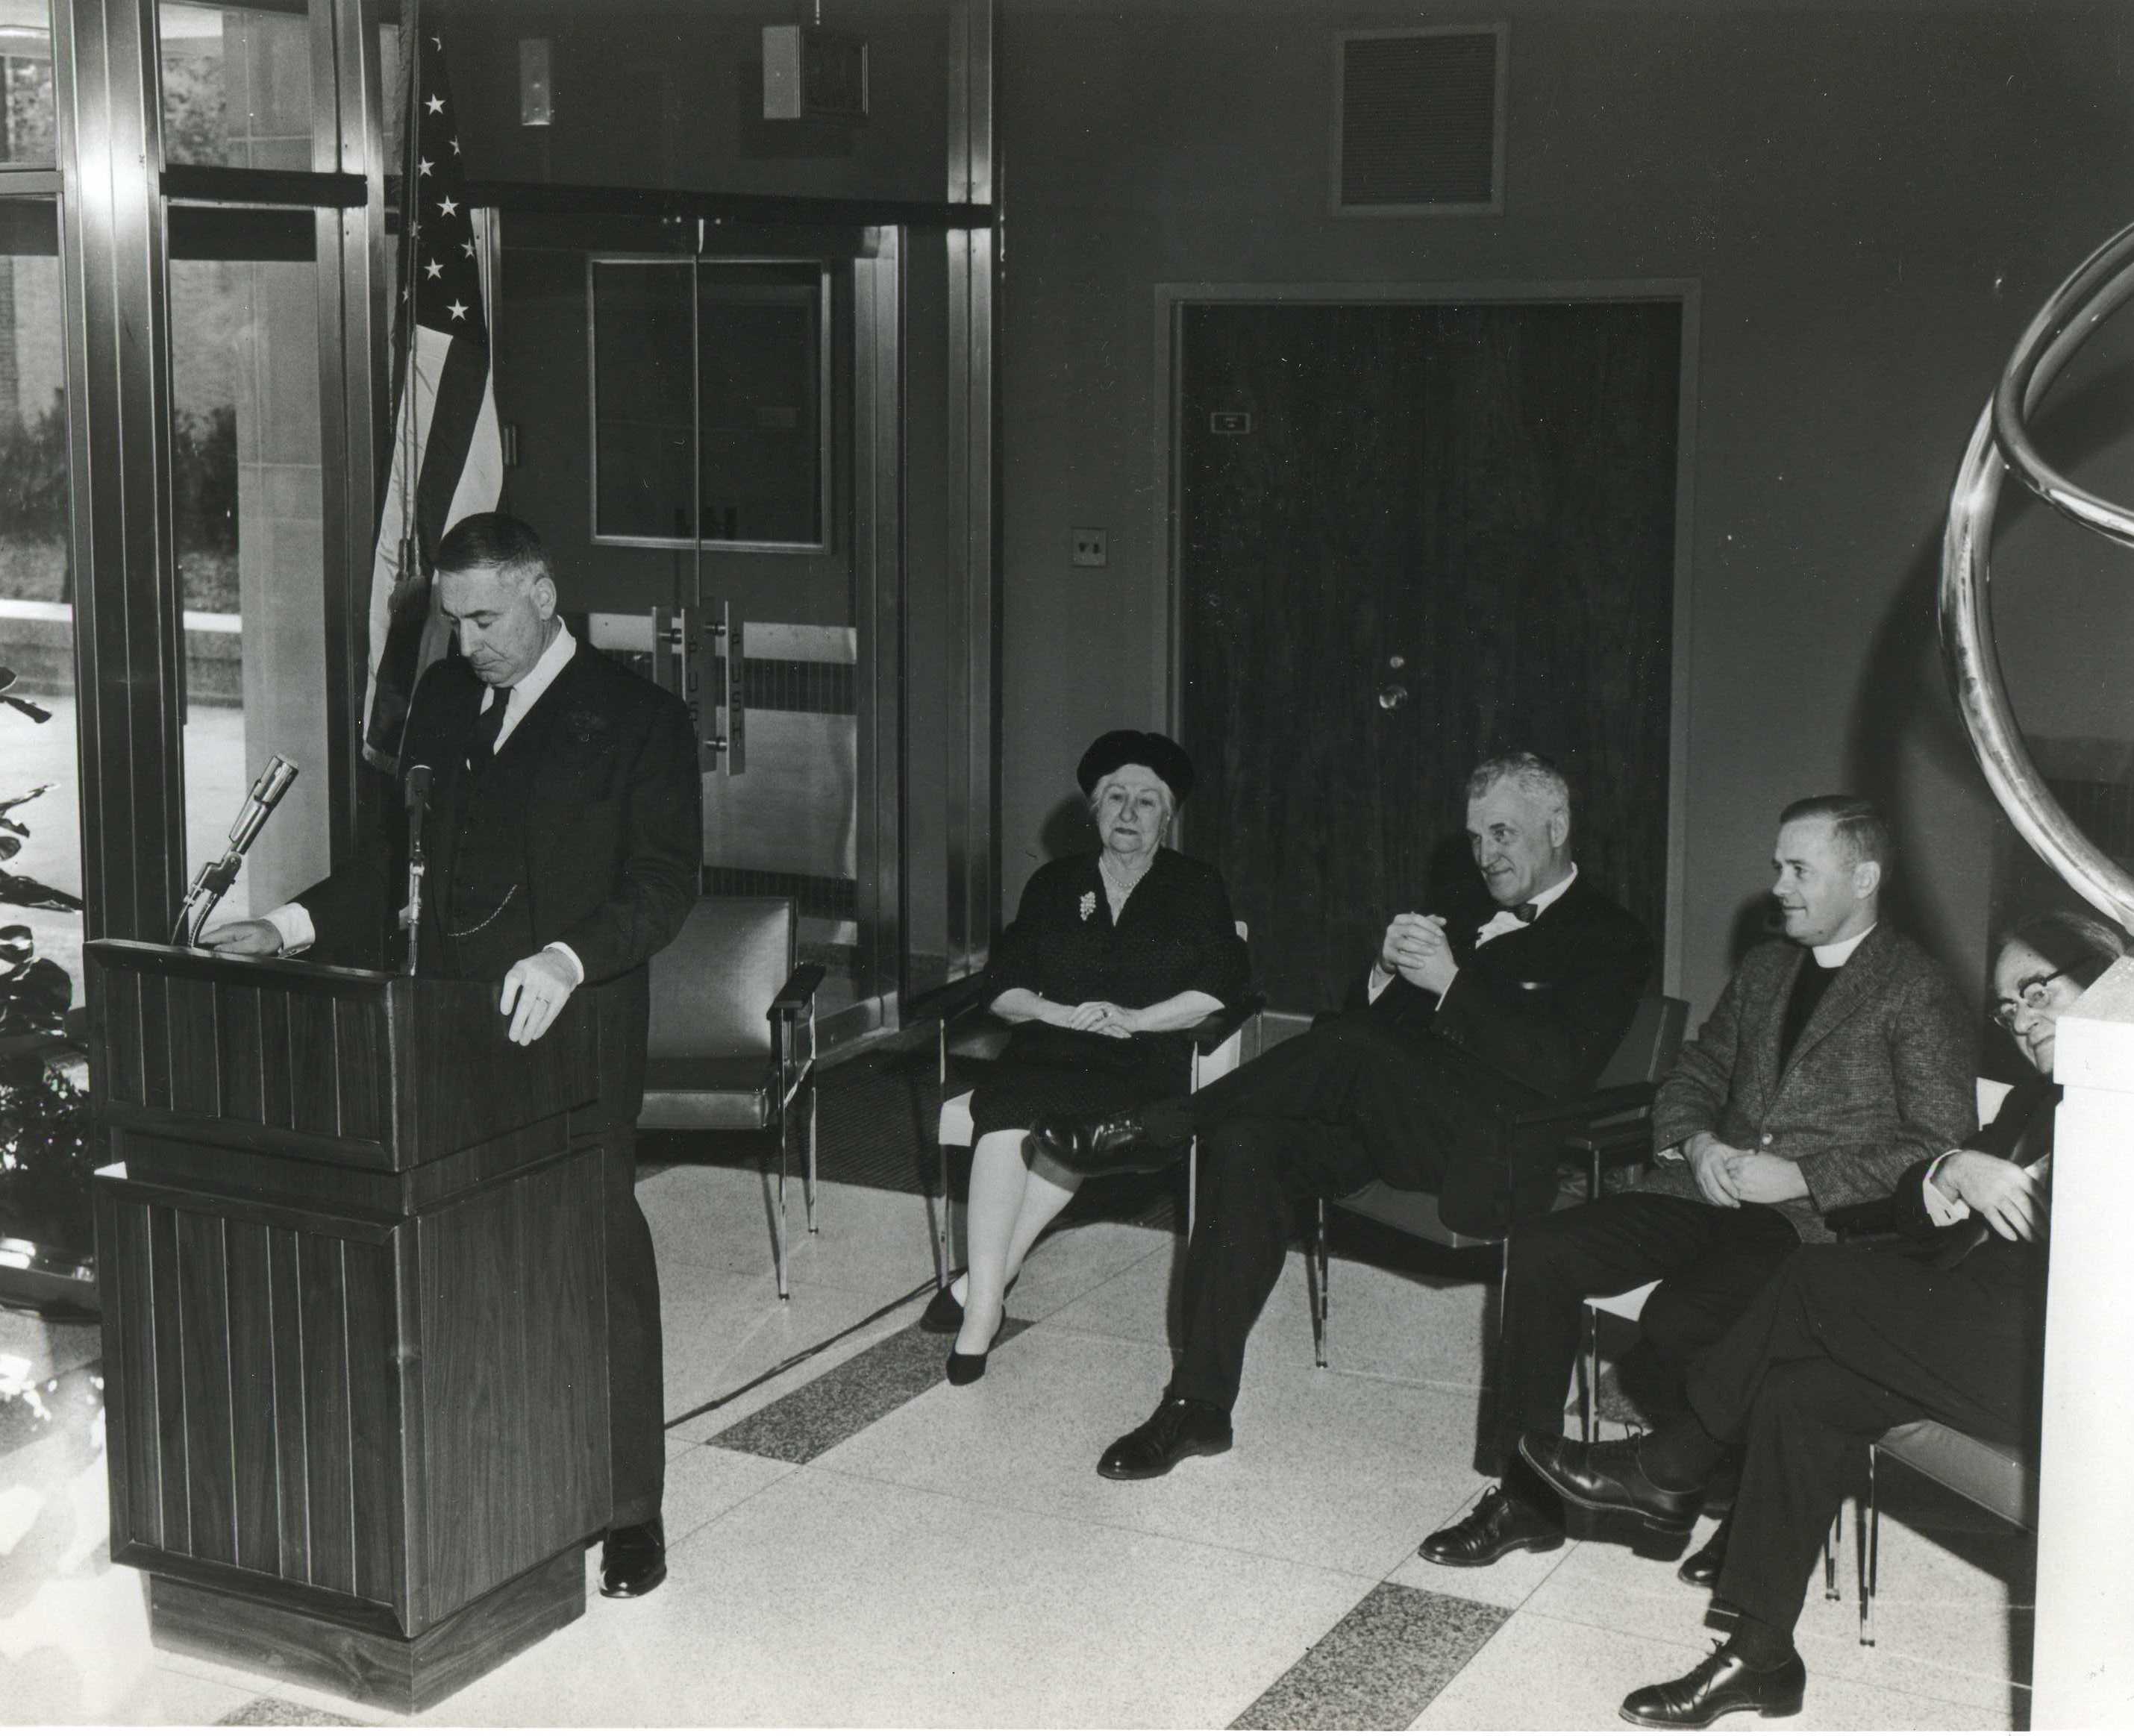 Walter Annenberg standing at a podium in 1960 with several people seated behind him